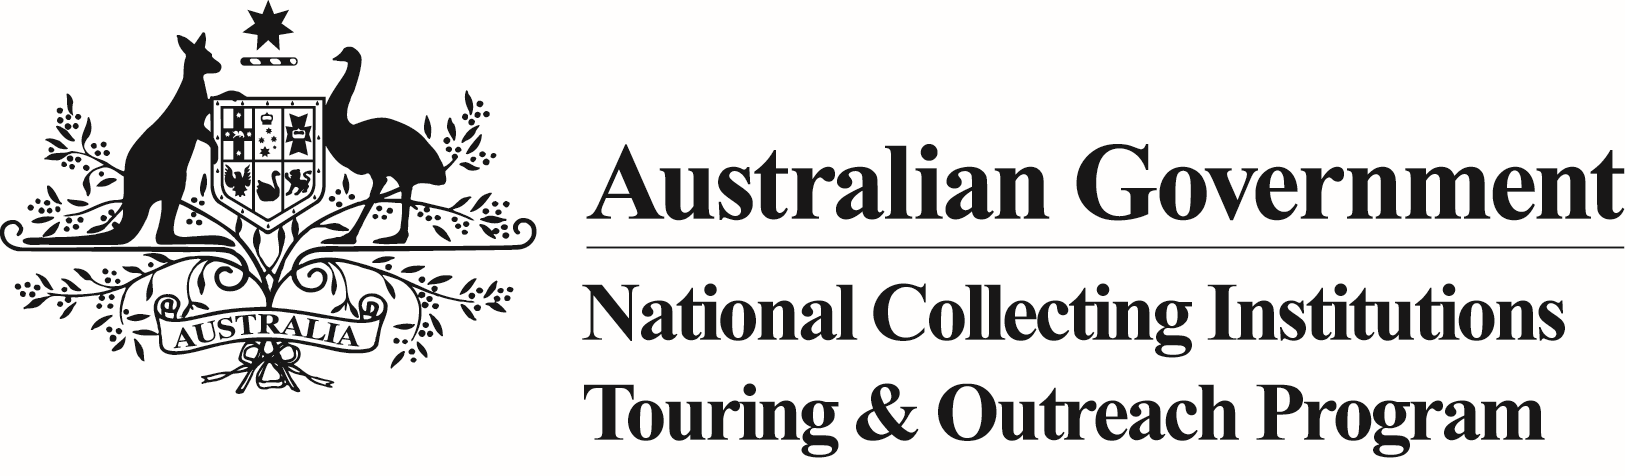 Australian Government National Collecting Institutions Touring & Outreach Program